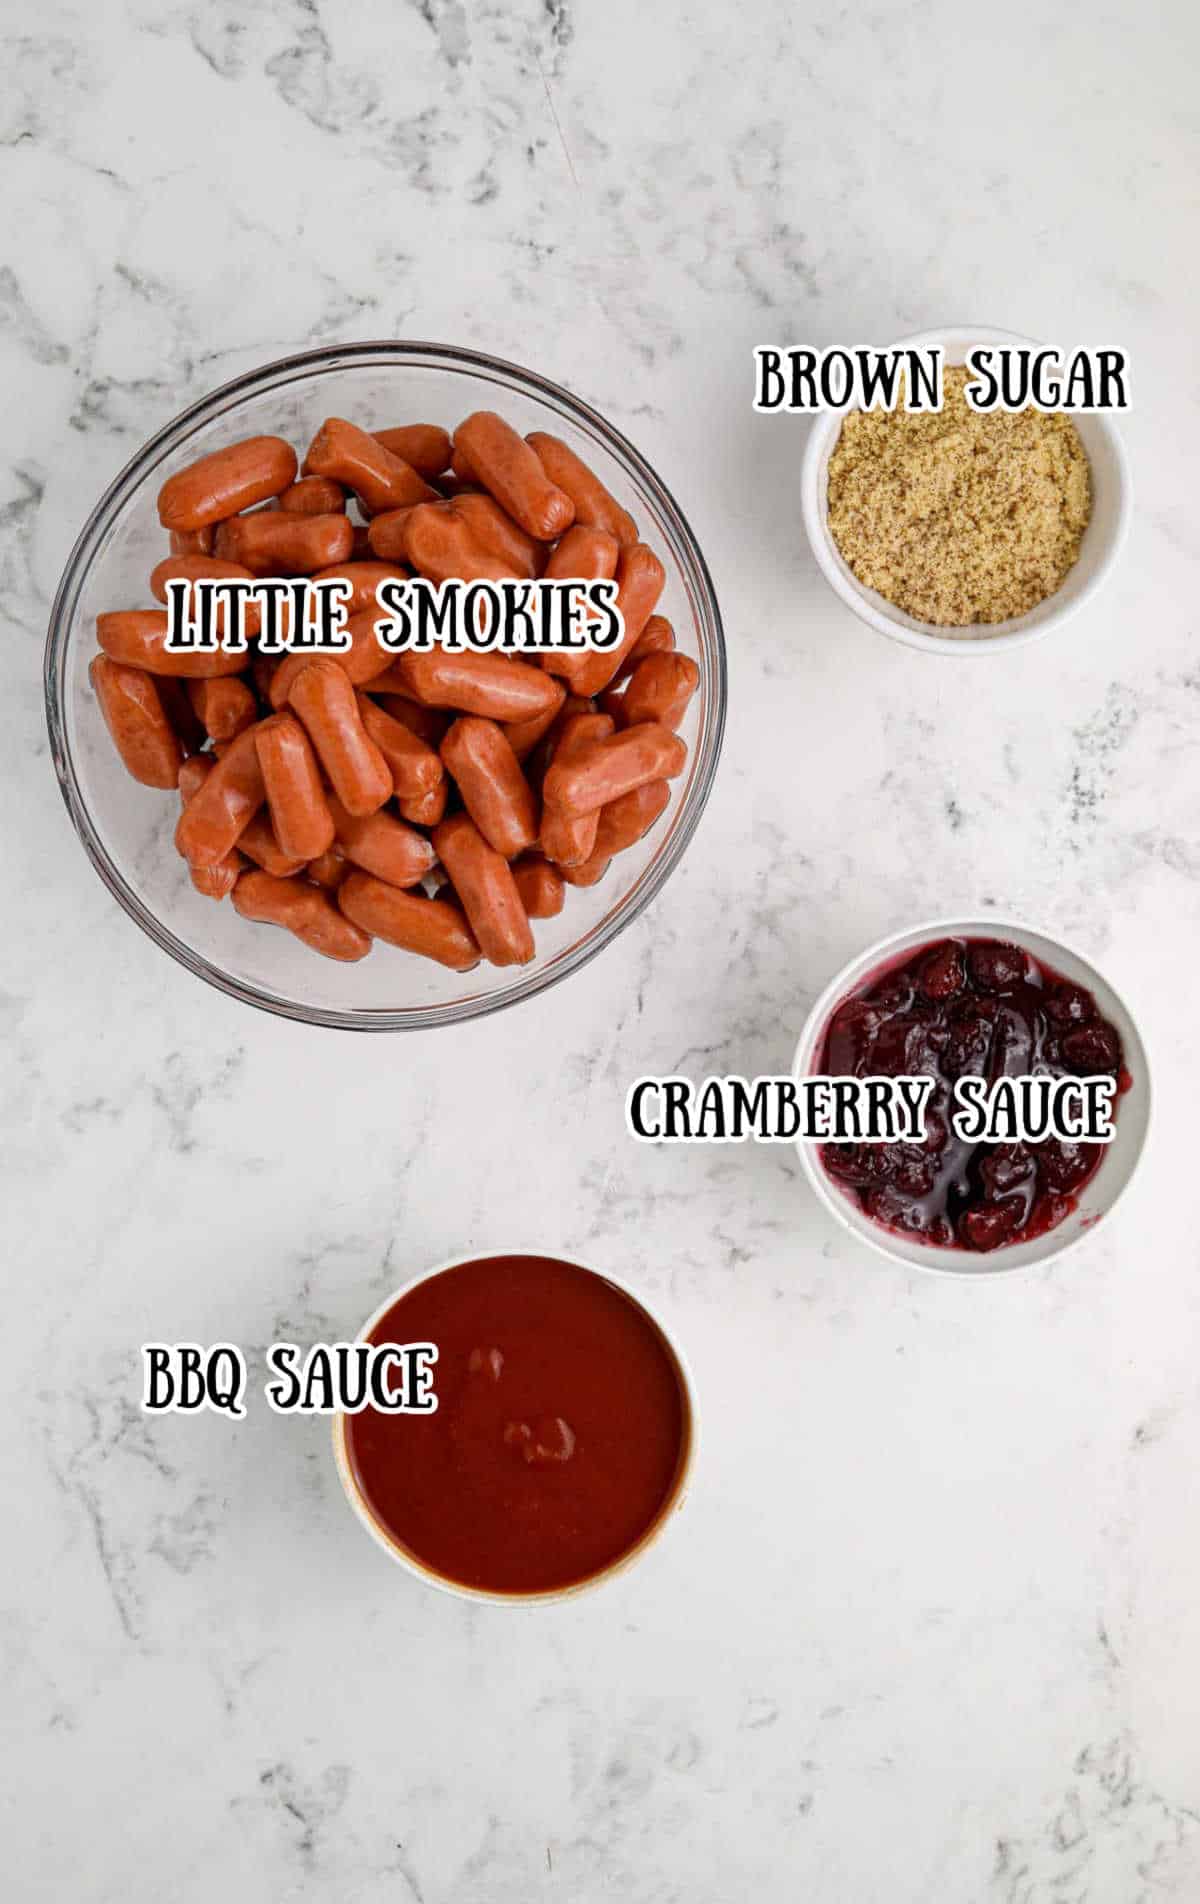 Labelled ingredients for slow cooker cranberry little smokies.